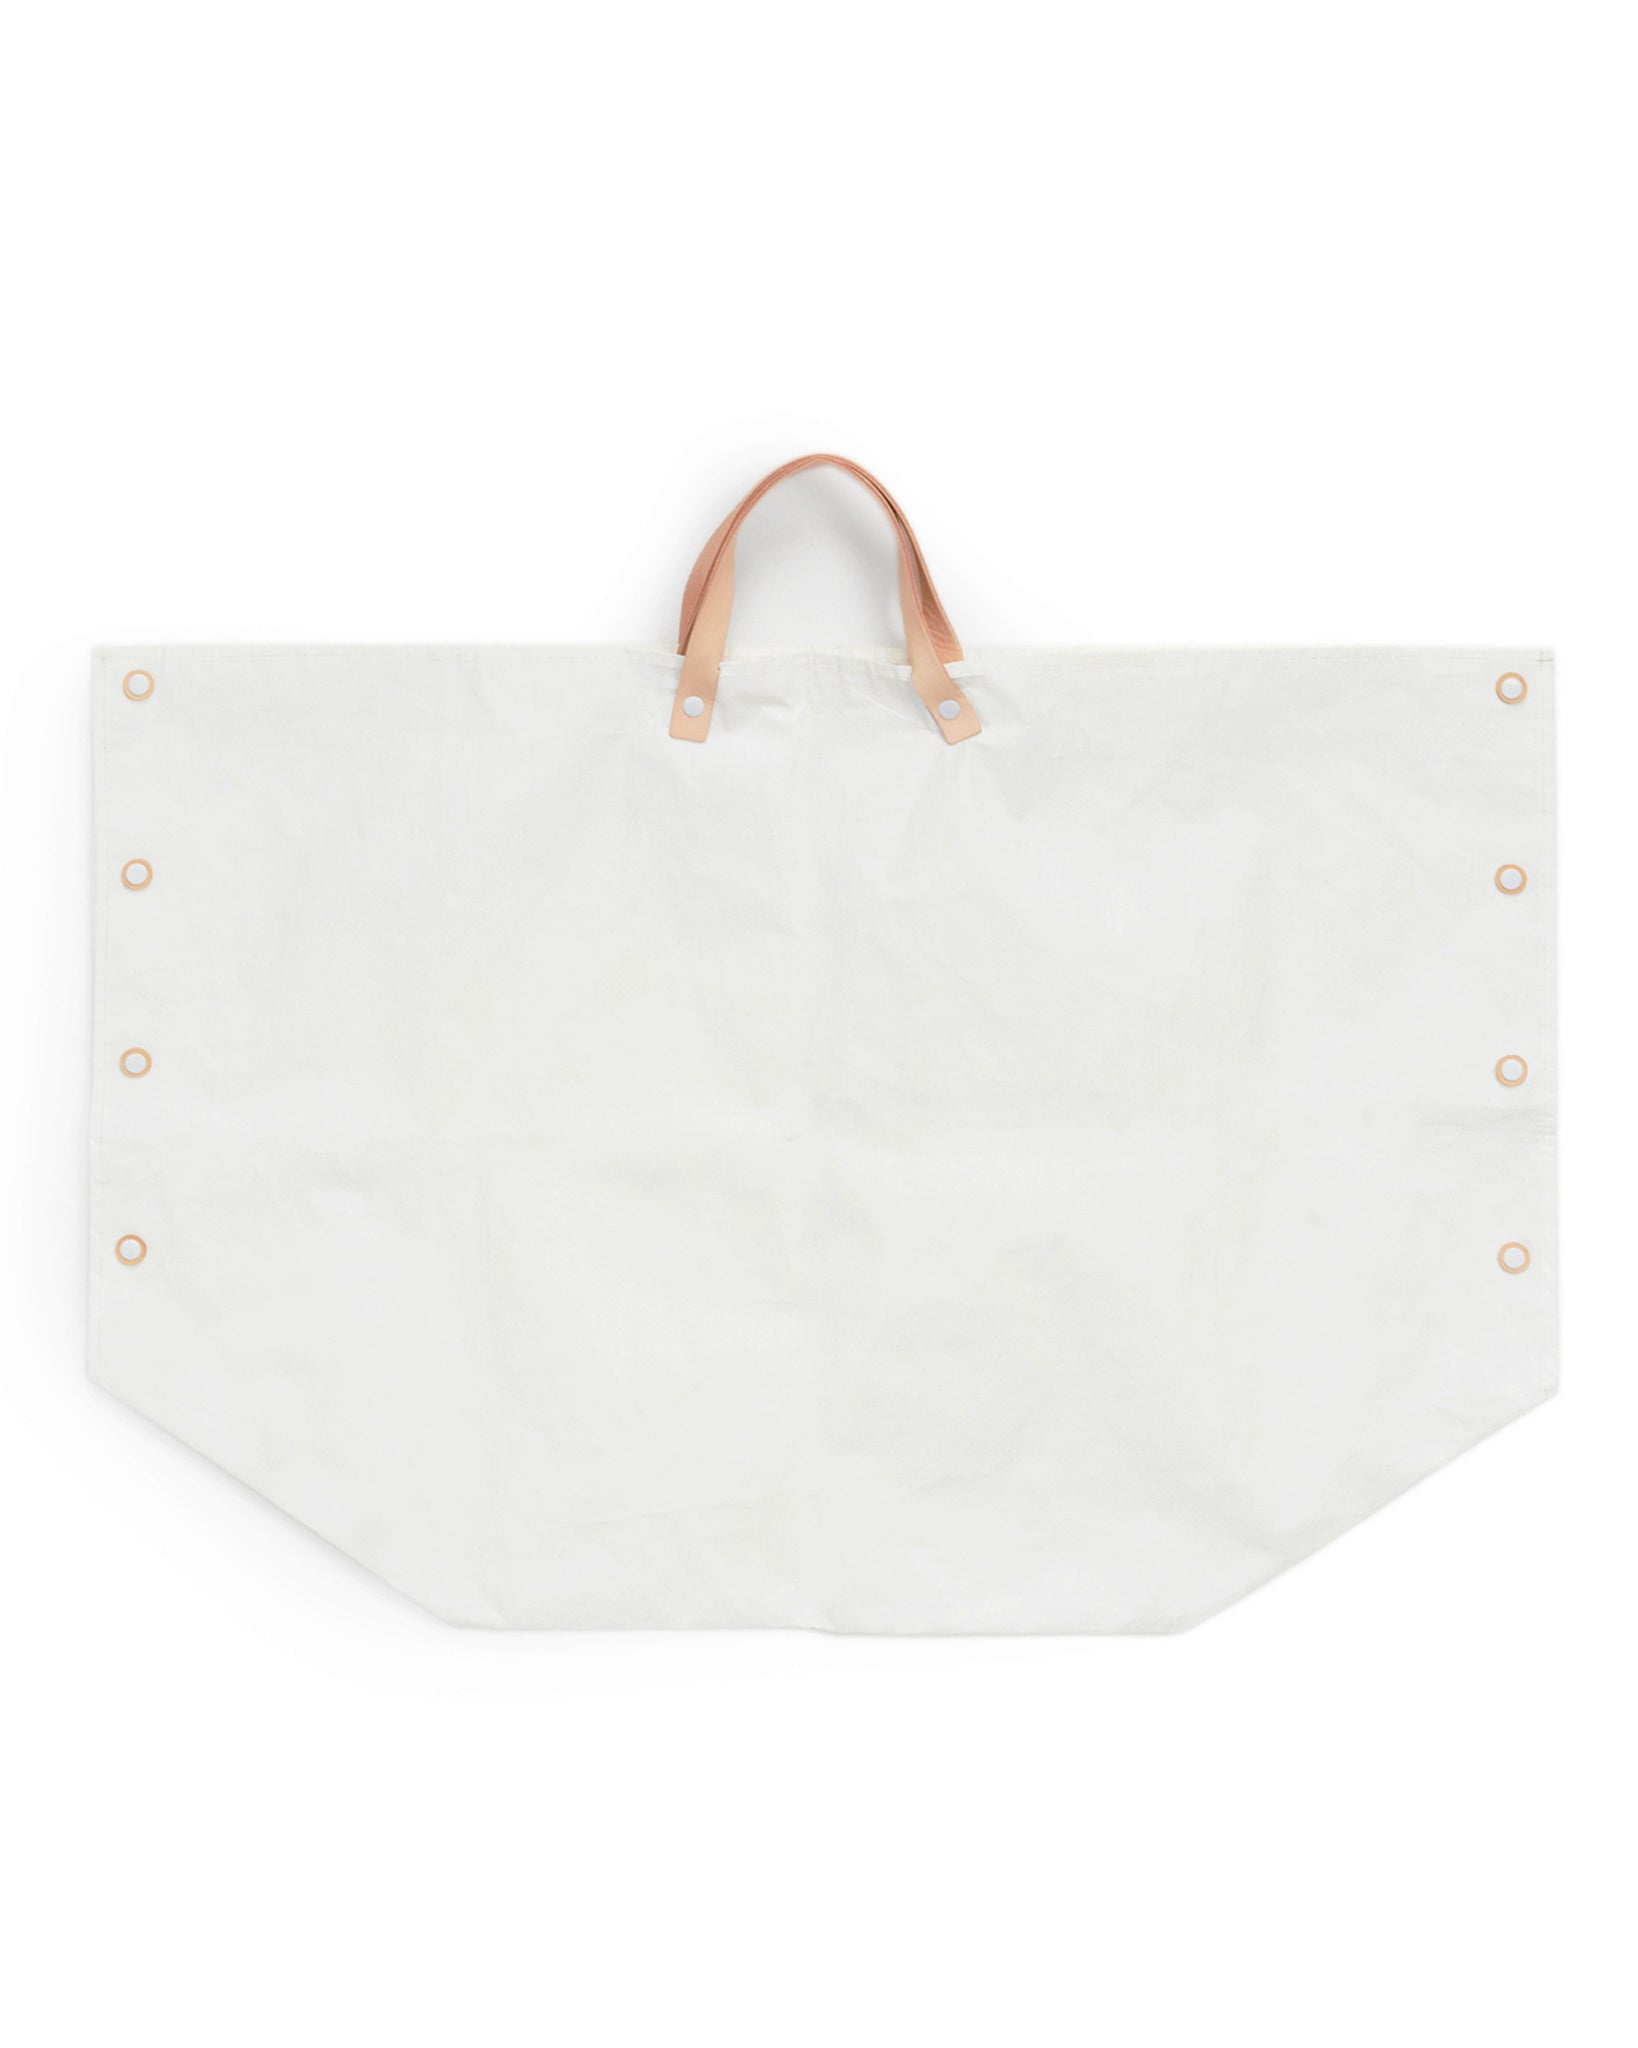 Silhouetted hender scheme picnic bag for family against white background.